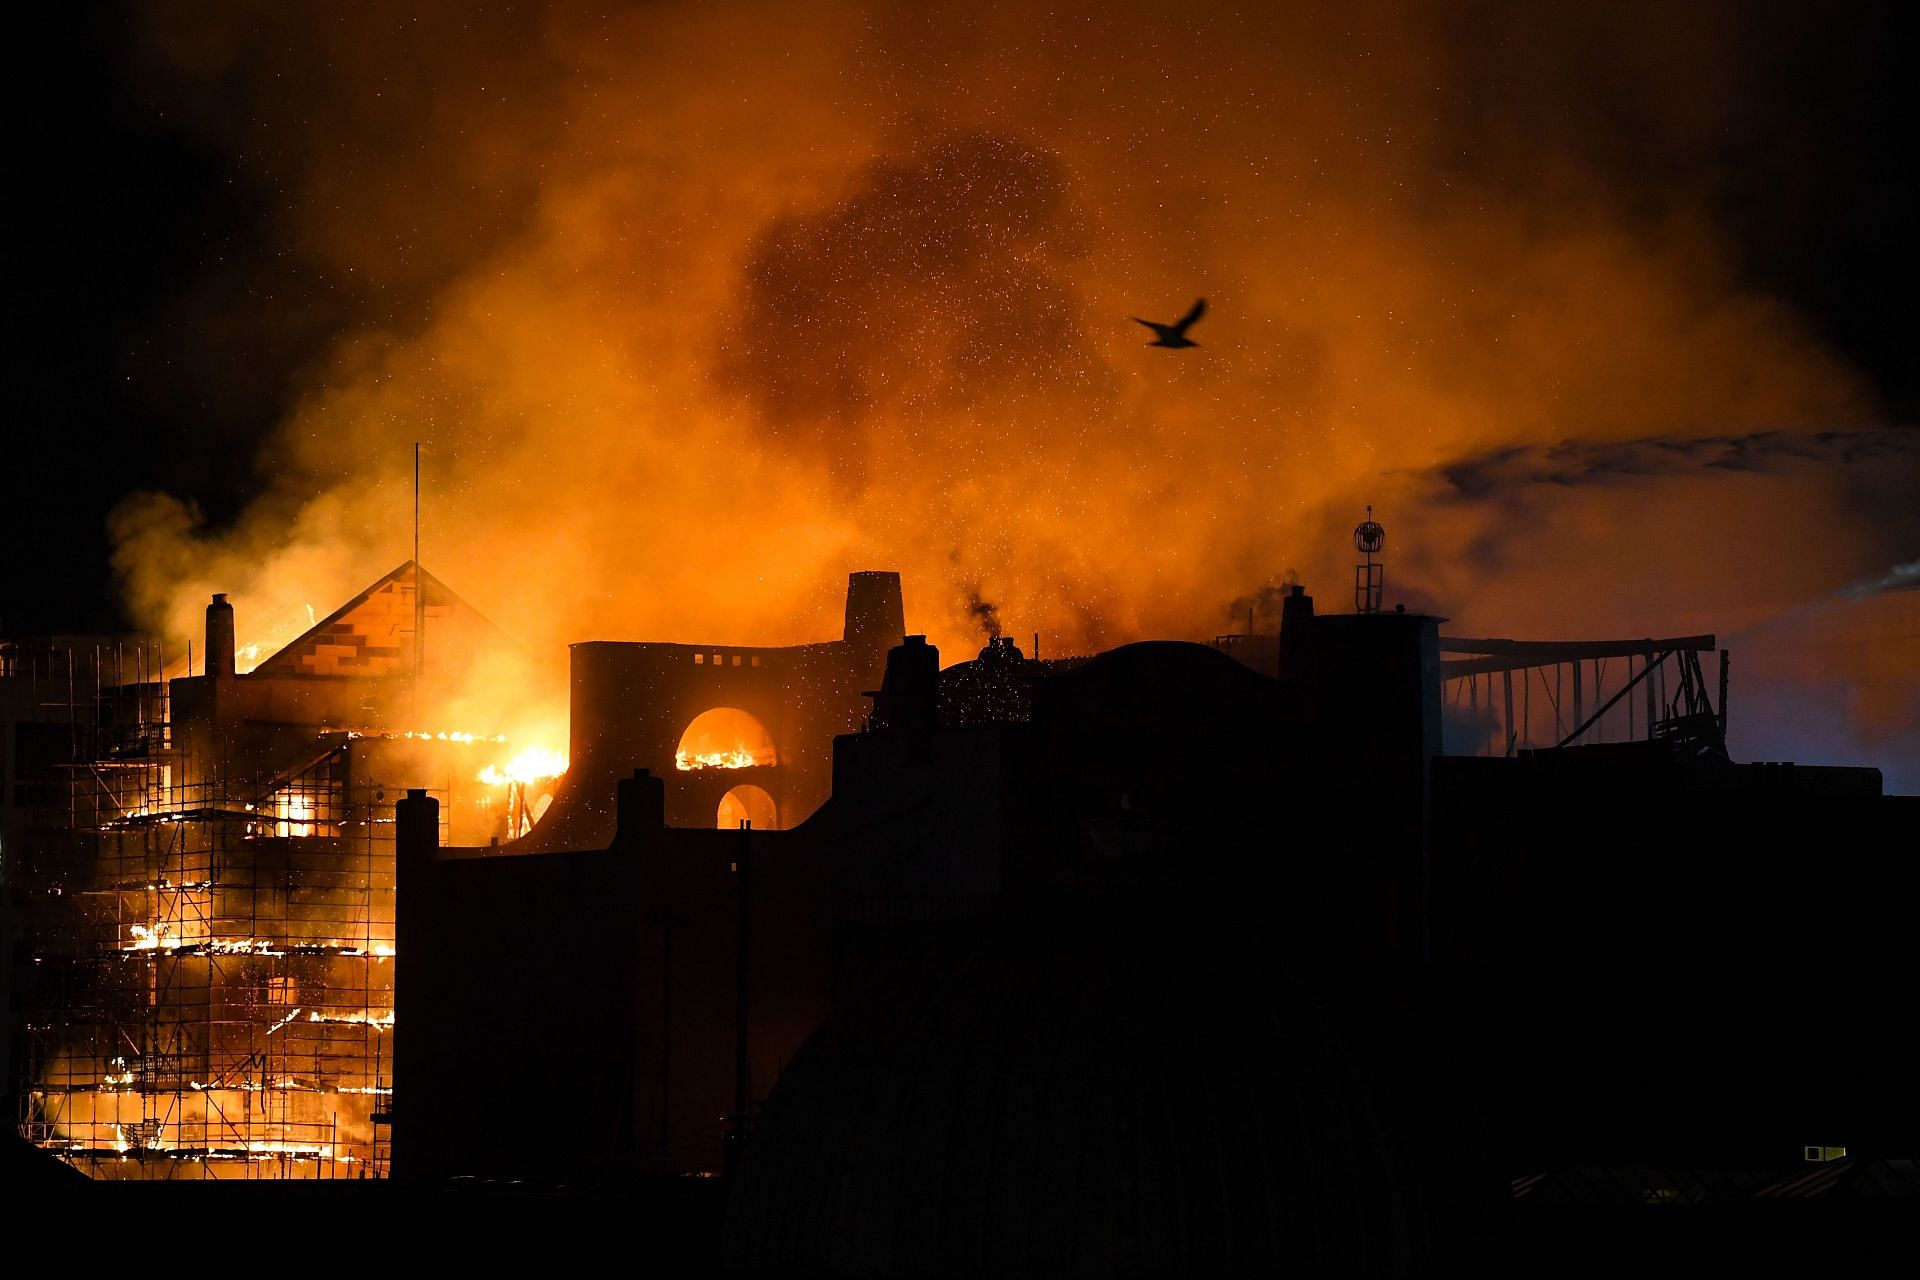 Glasgow School Of Art Building On Fire For The Second Time